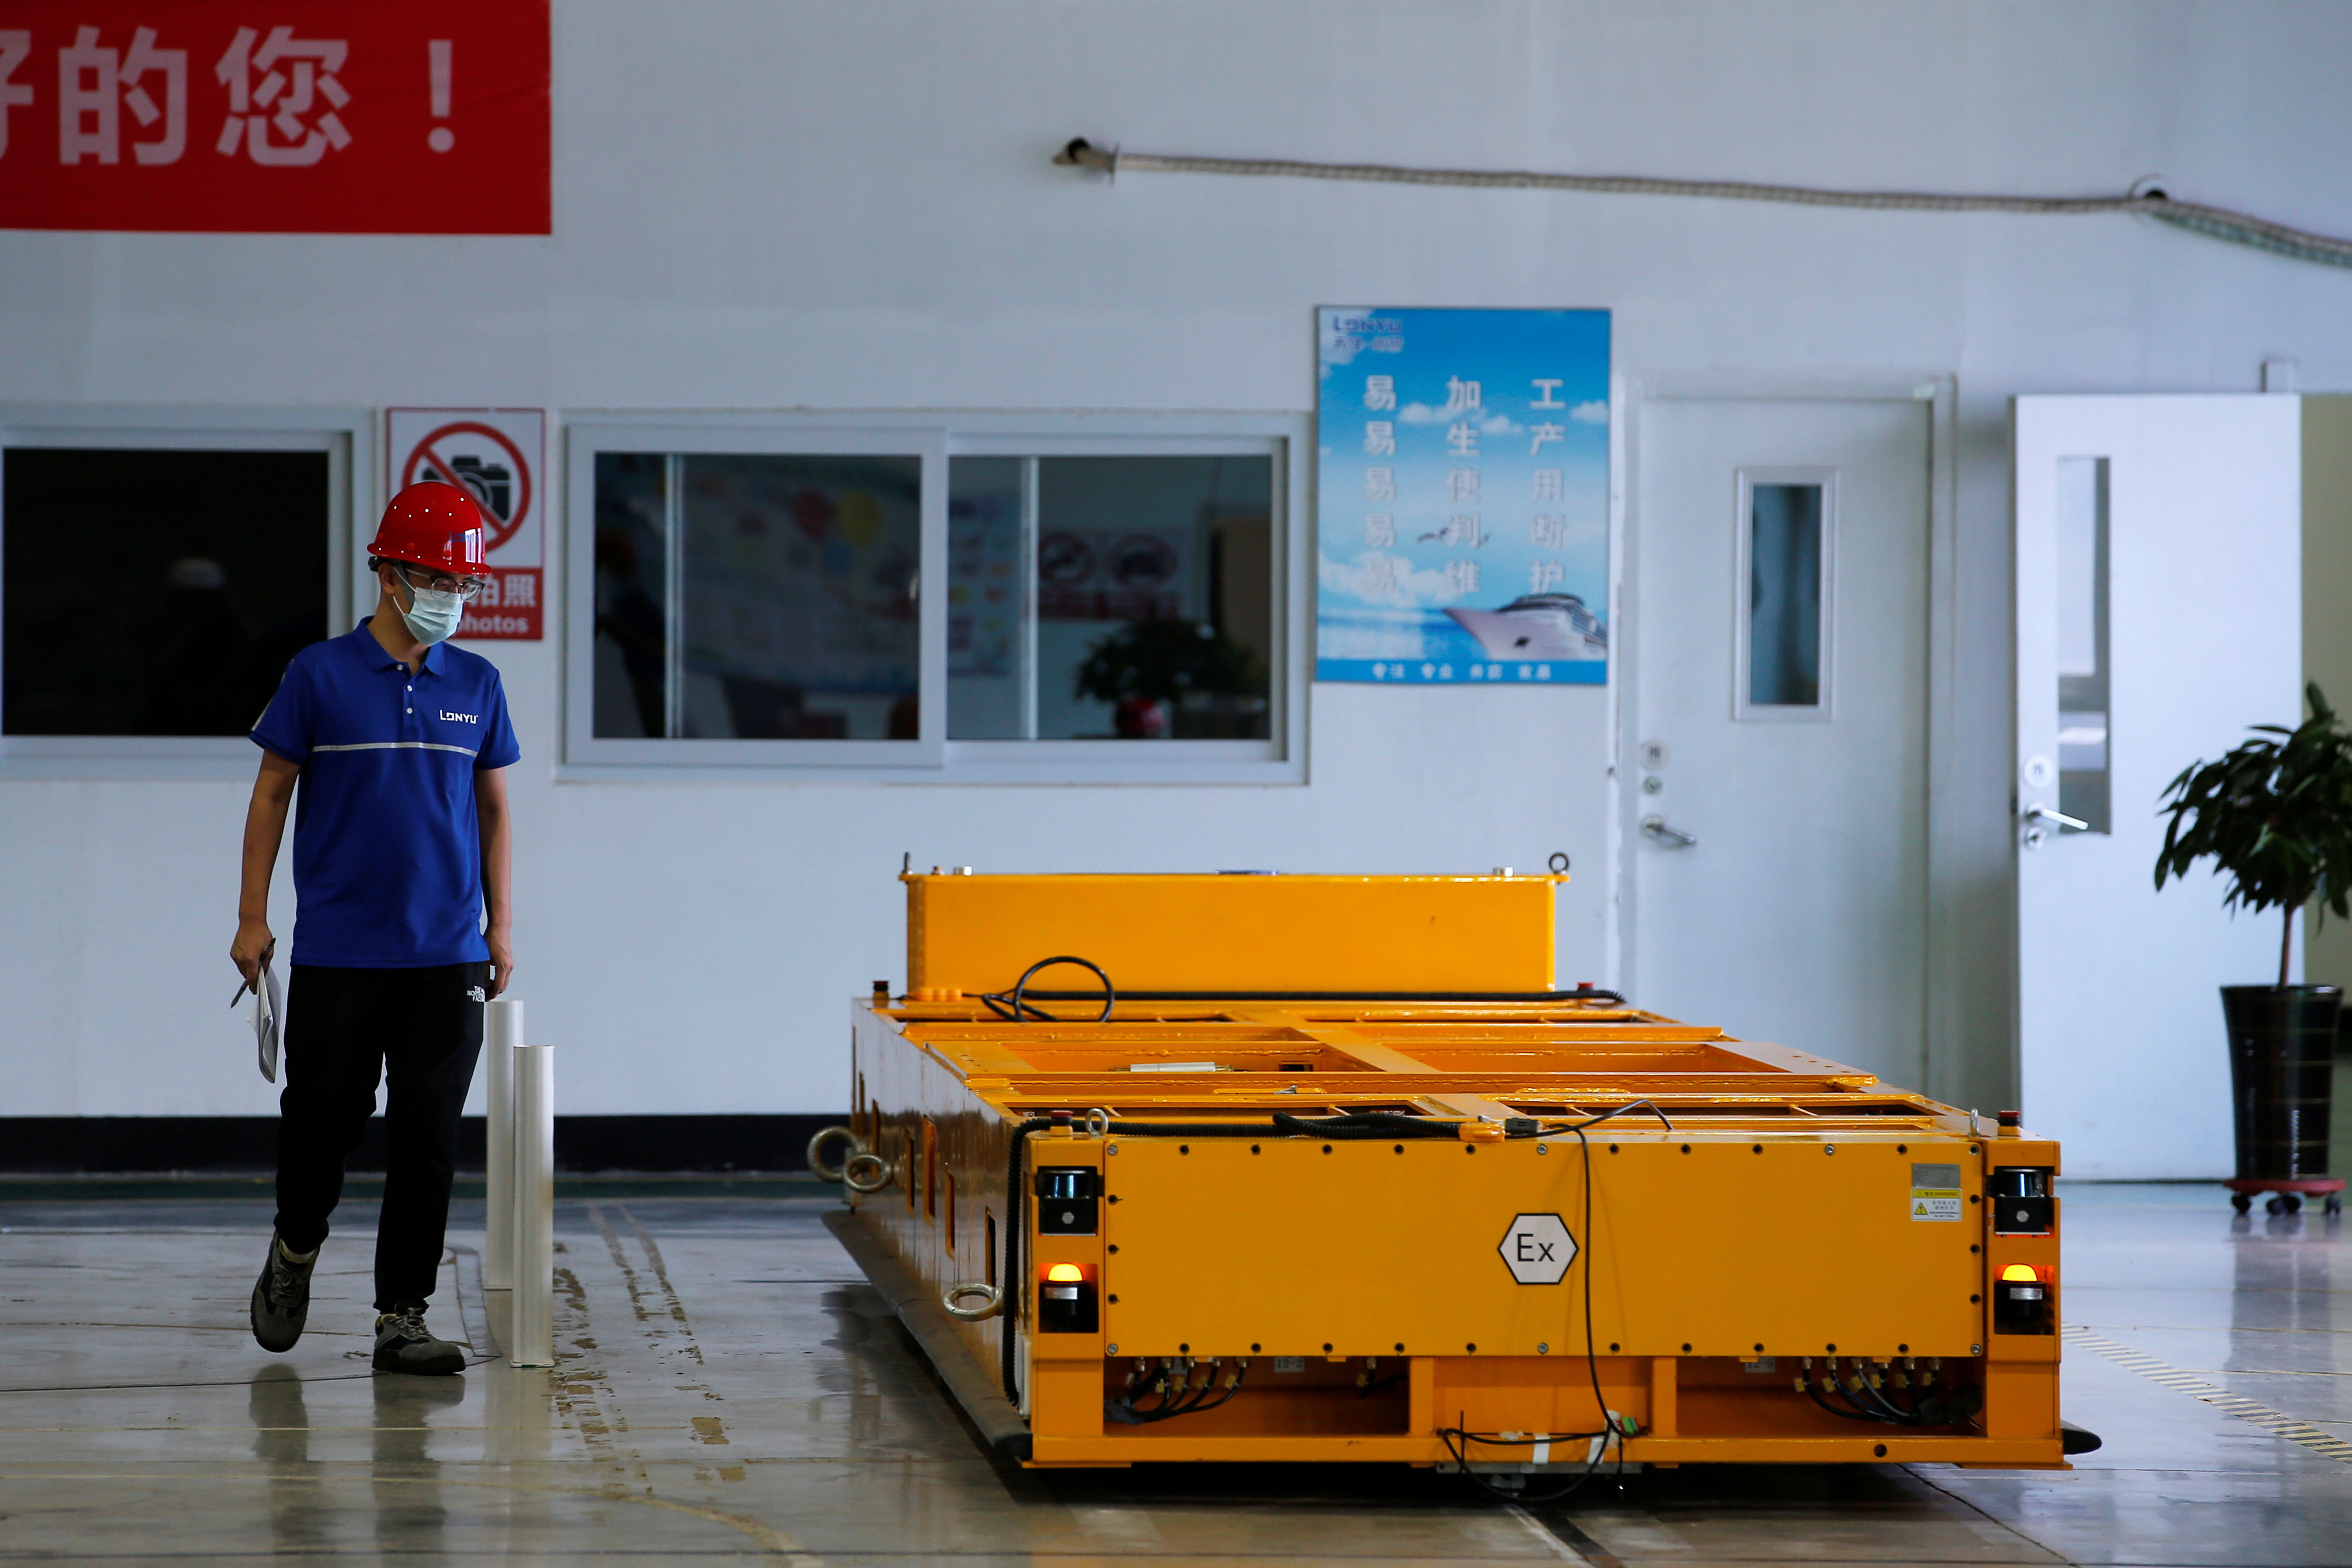 An employee inspects an automated guided vehicle (AGV) at Lonyu Robot Co in Tianjin